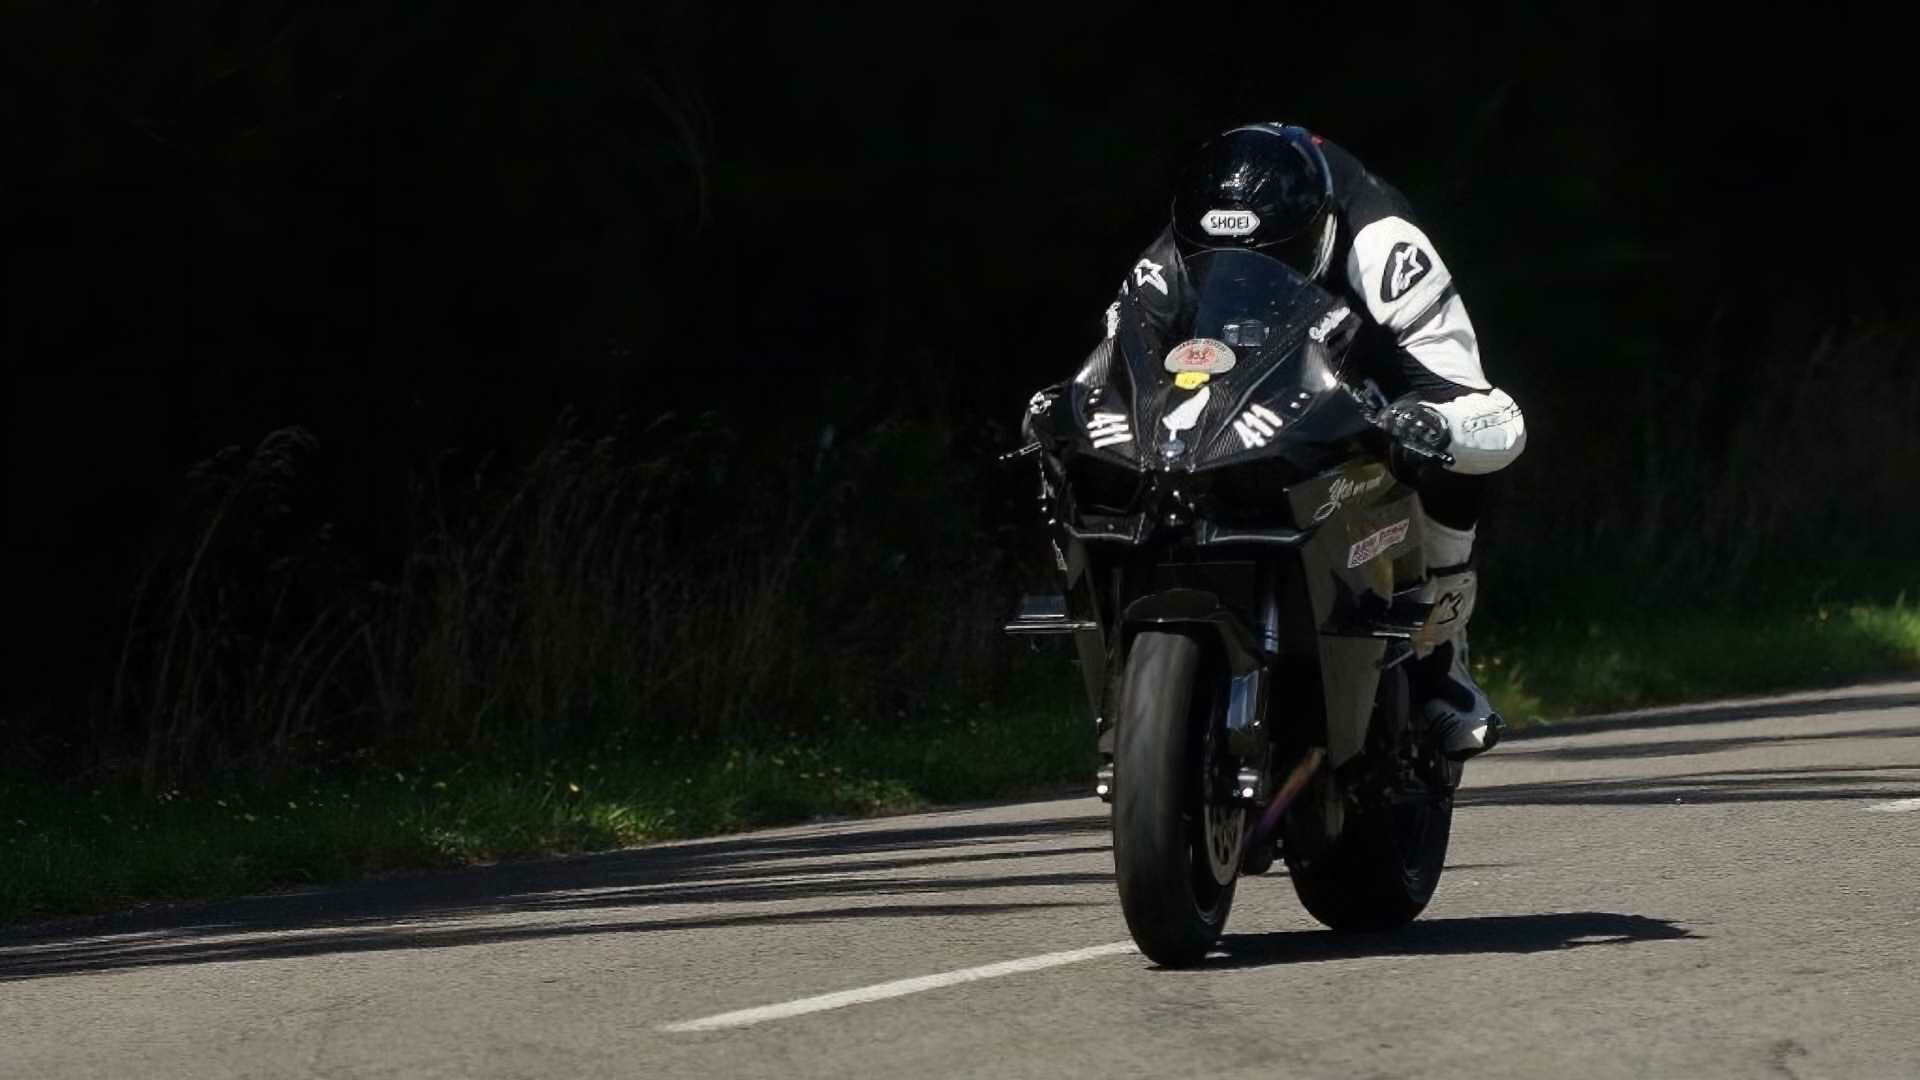 New speed record set
- also in the MOTORCYCLES.NEWS APP